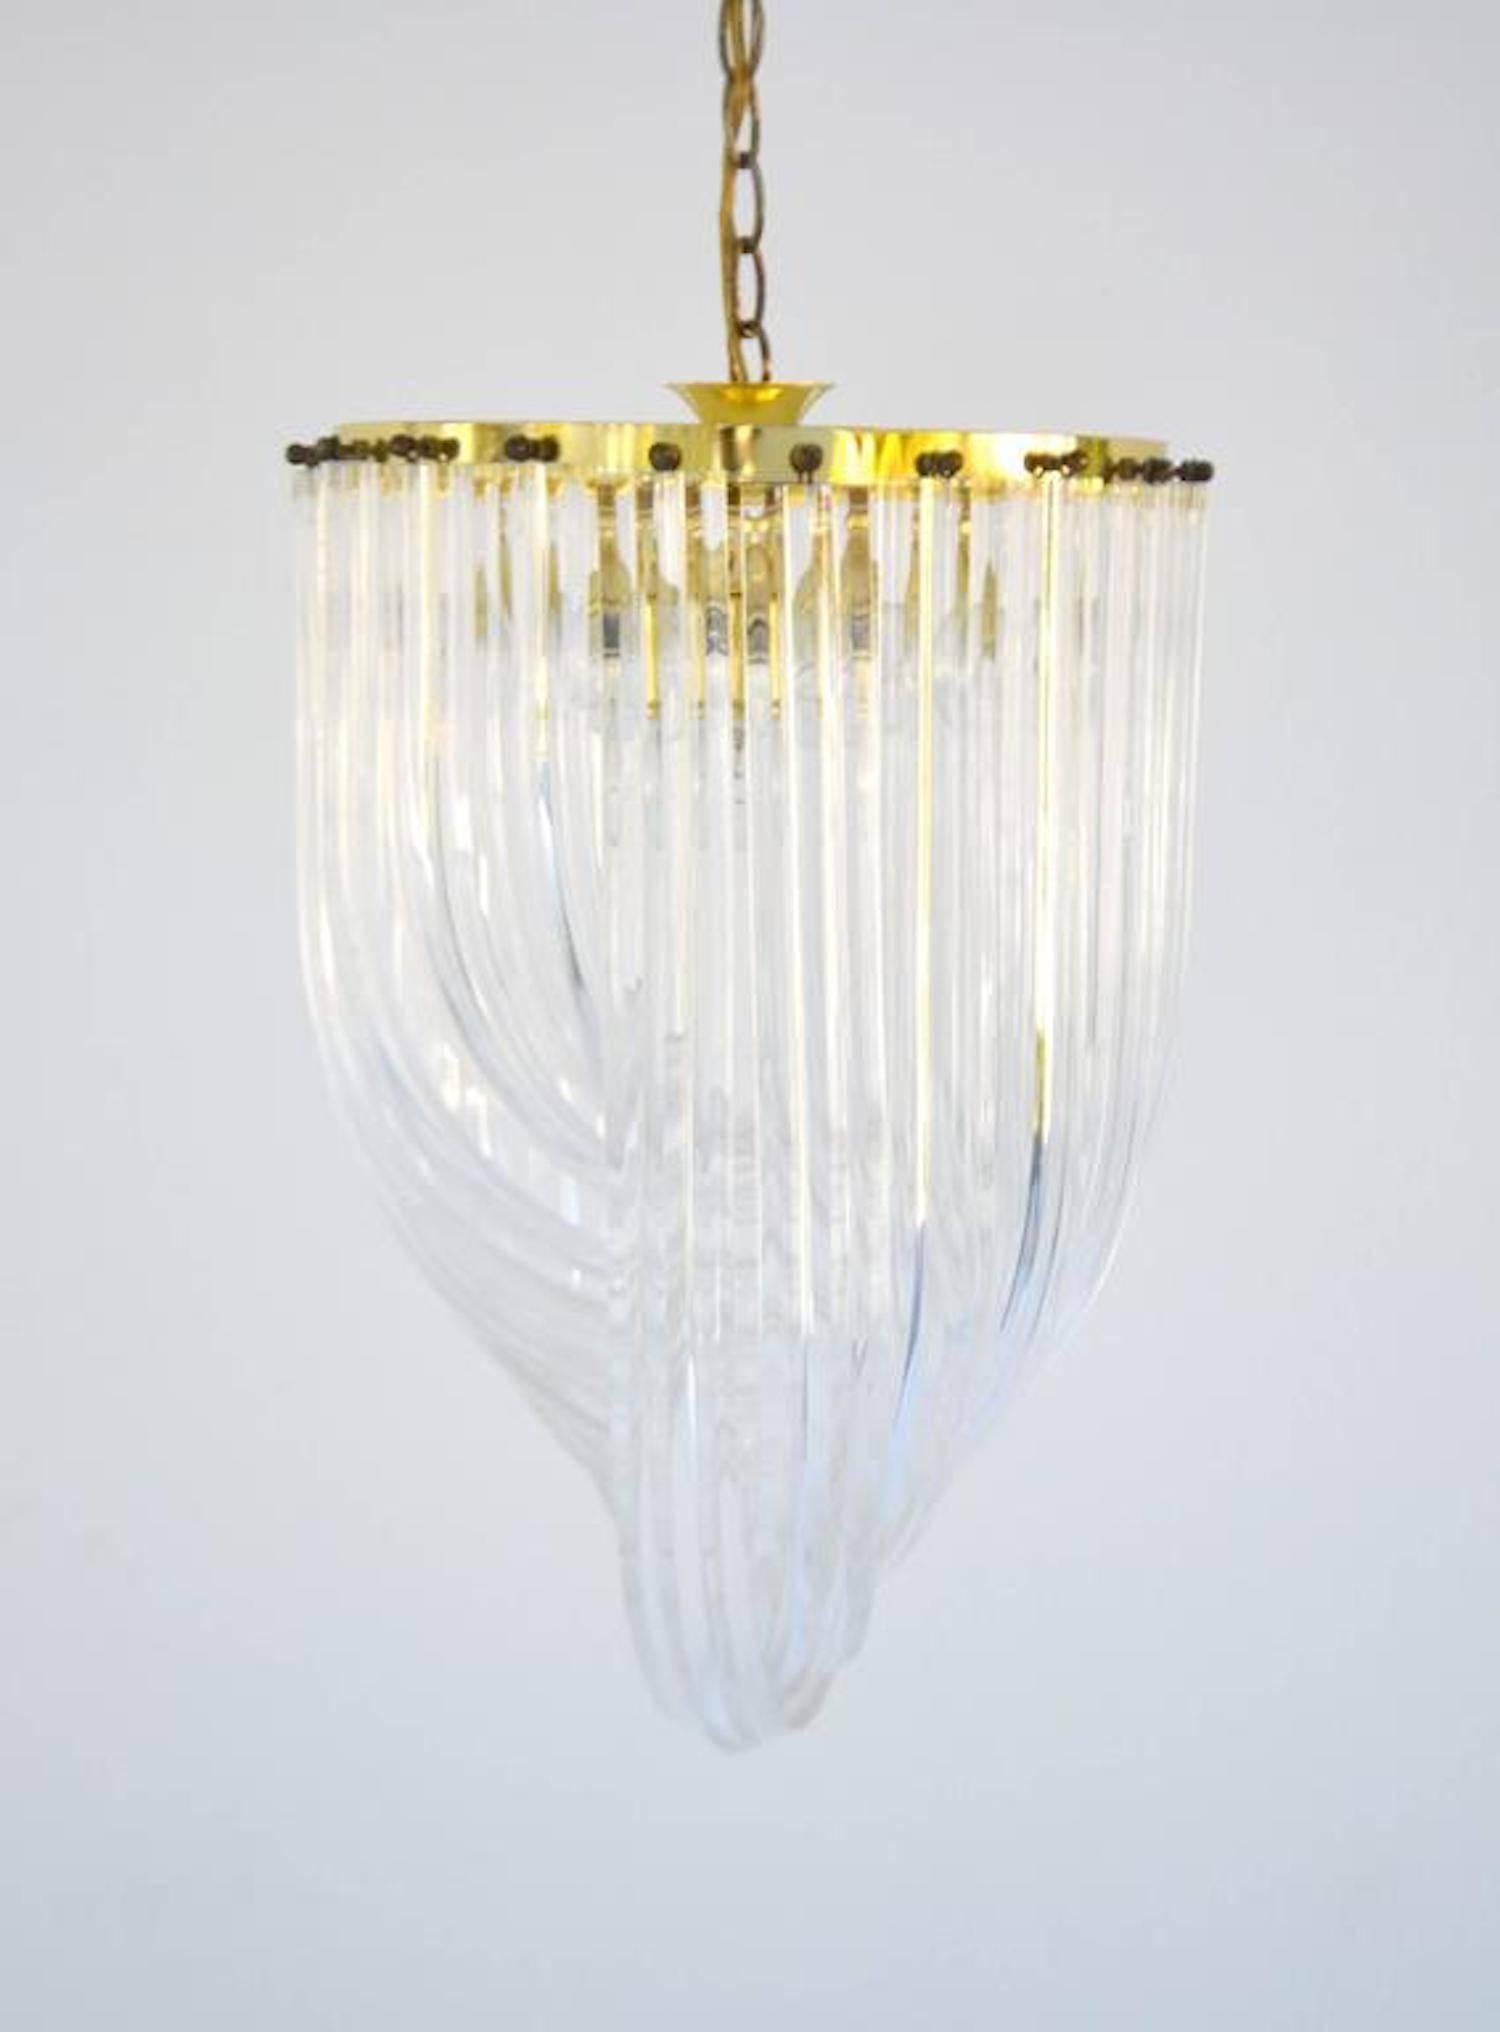 Glamorous midcentury acrylic crystal rod chandelier, circa 1960s-1970s. This sculptural round chandelier is designed of intertwining loops of clear twisted Lucite rods suspended from a brass frame.

Measurements:
Overall: 14